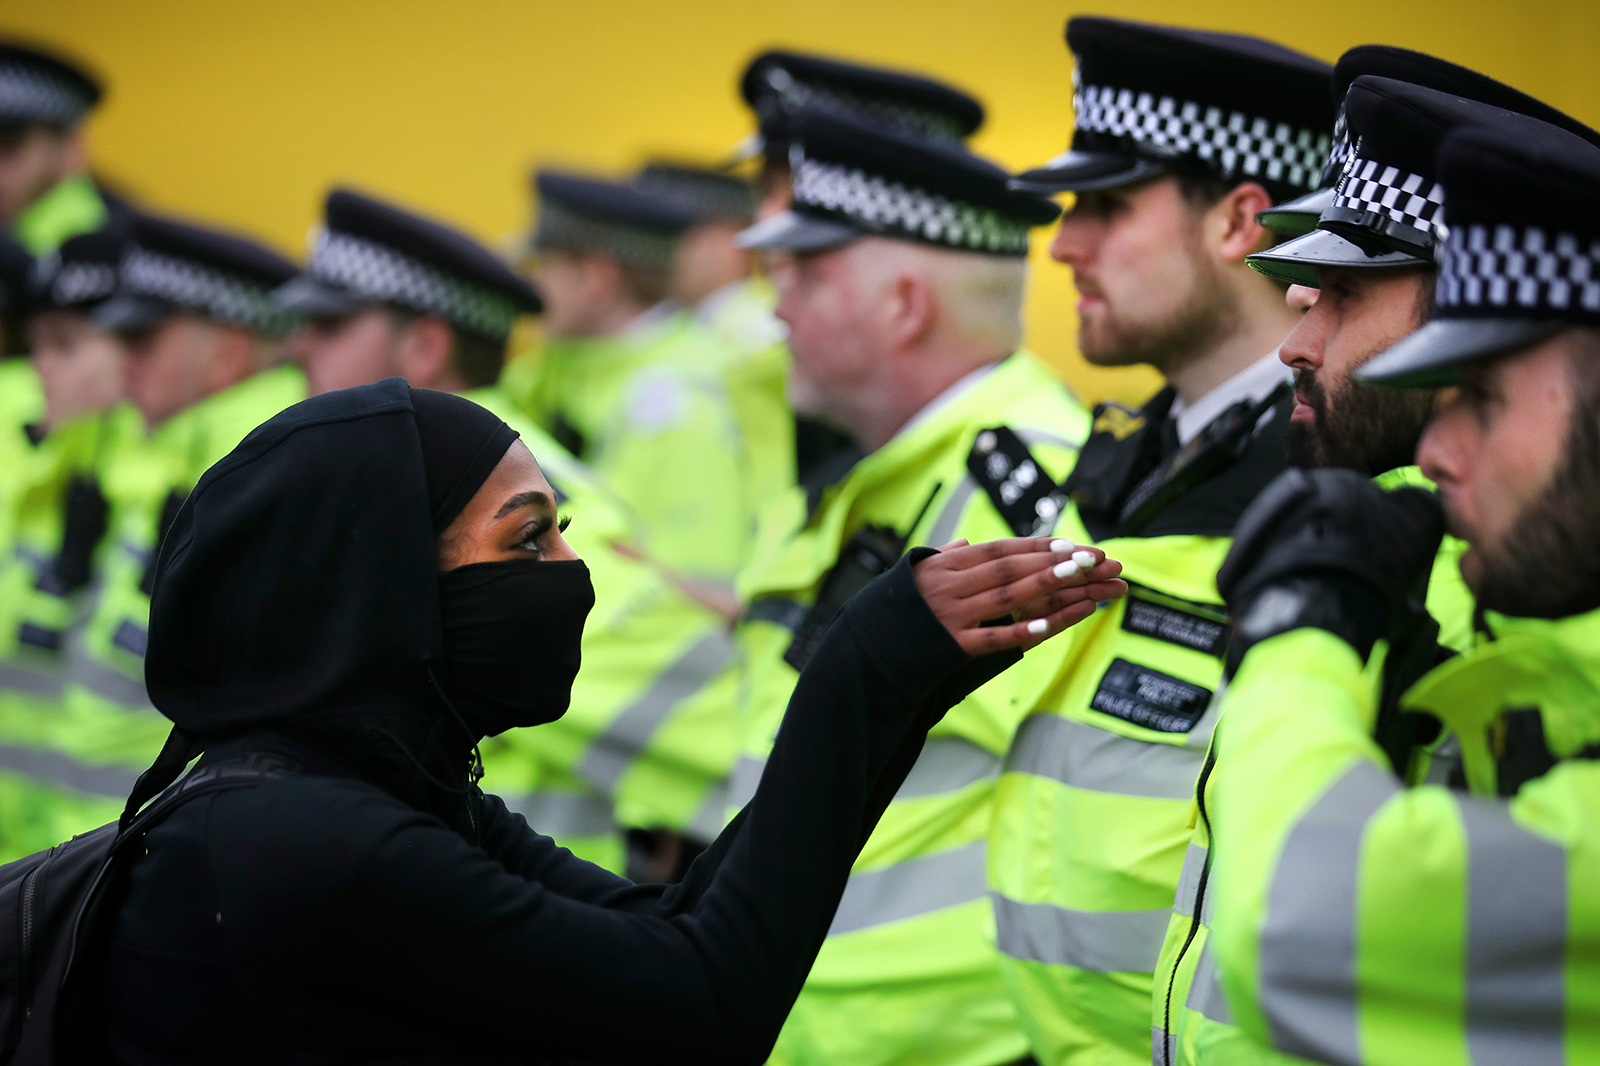 A protester faces a police officer during a Black Life Topic protest in London on June 6th.